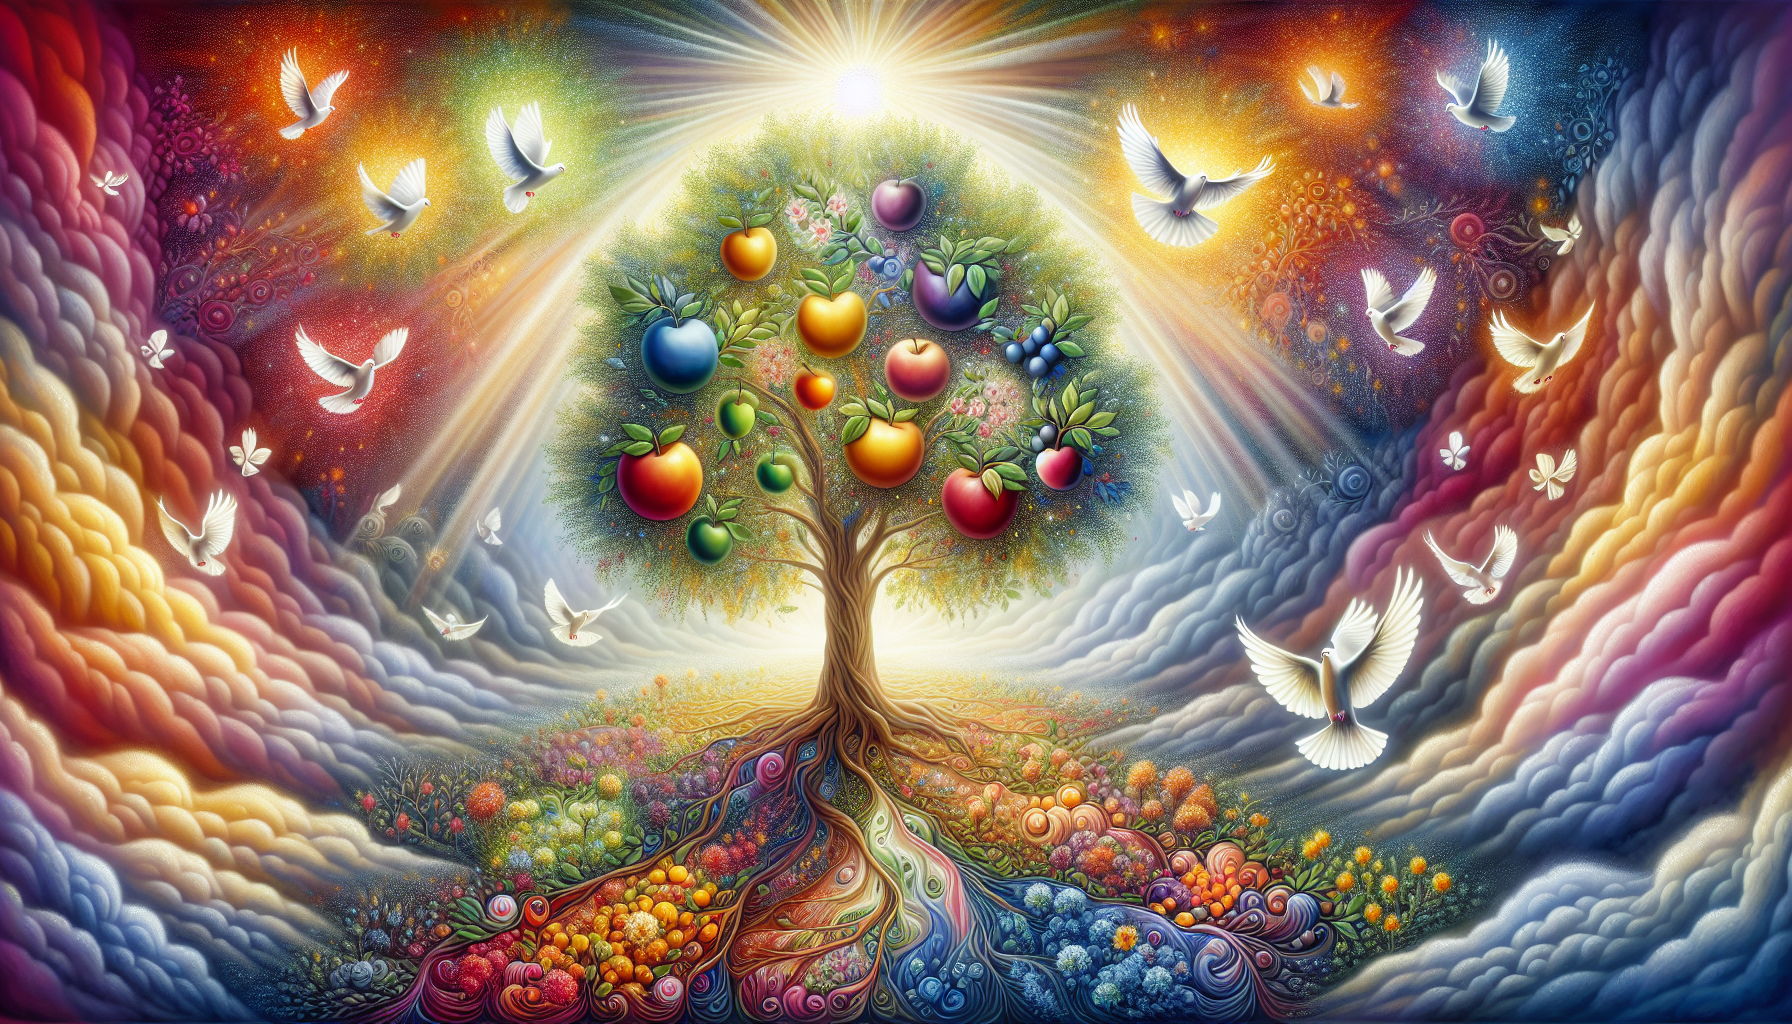 Create an image of a radiant and ethereal tree bearing seven different symbolic fruits. Each fruit is labeled with a name of one of the virtues of the Holy Spirit: wisdom, understanding, counsel, fort